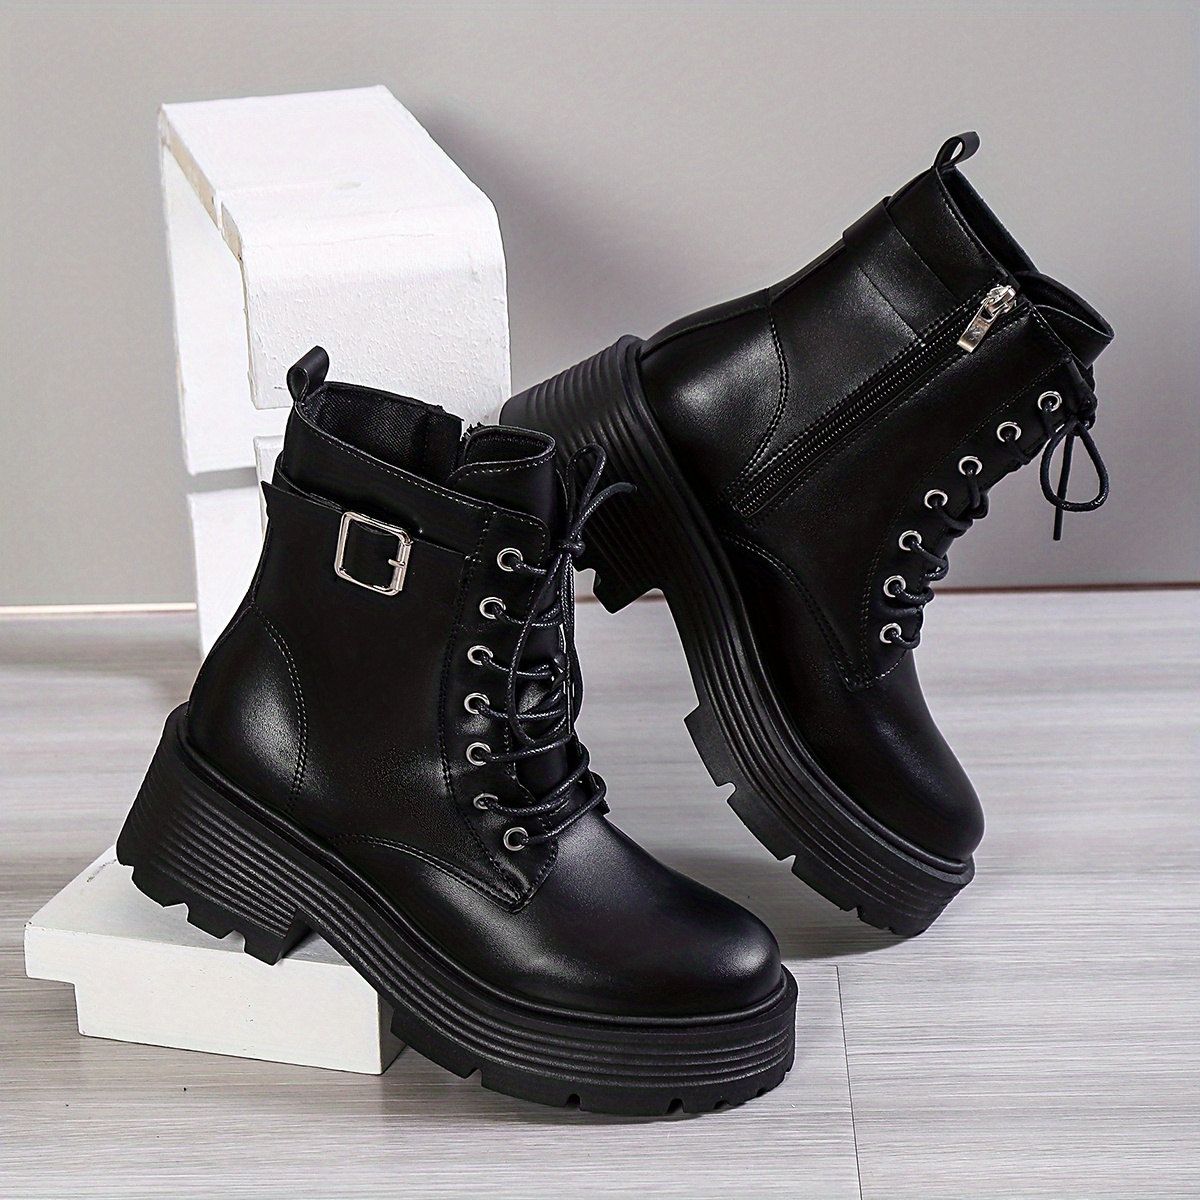 Women's Platform Ankle Boots, Round Toe Lace Up & Side Zipper Motorcycle  Boots, Chunky Heeled Combat Boots